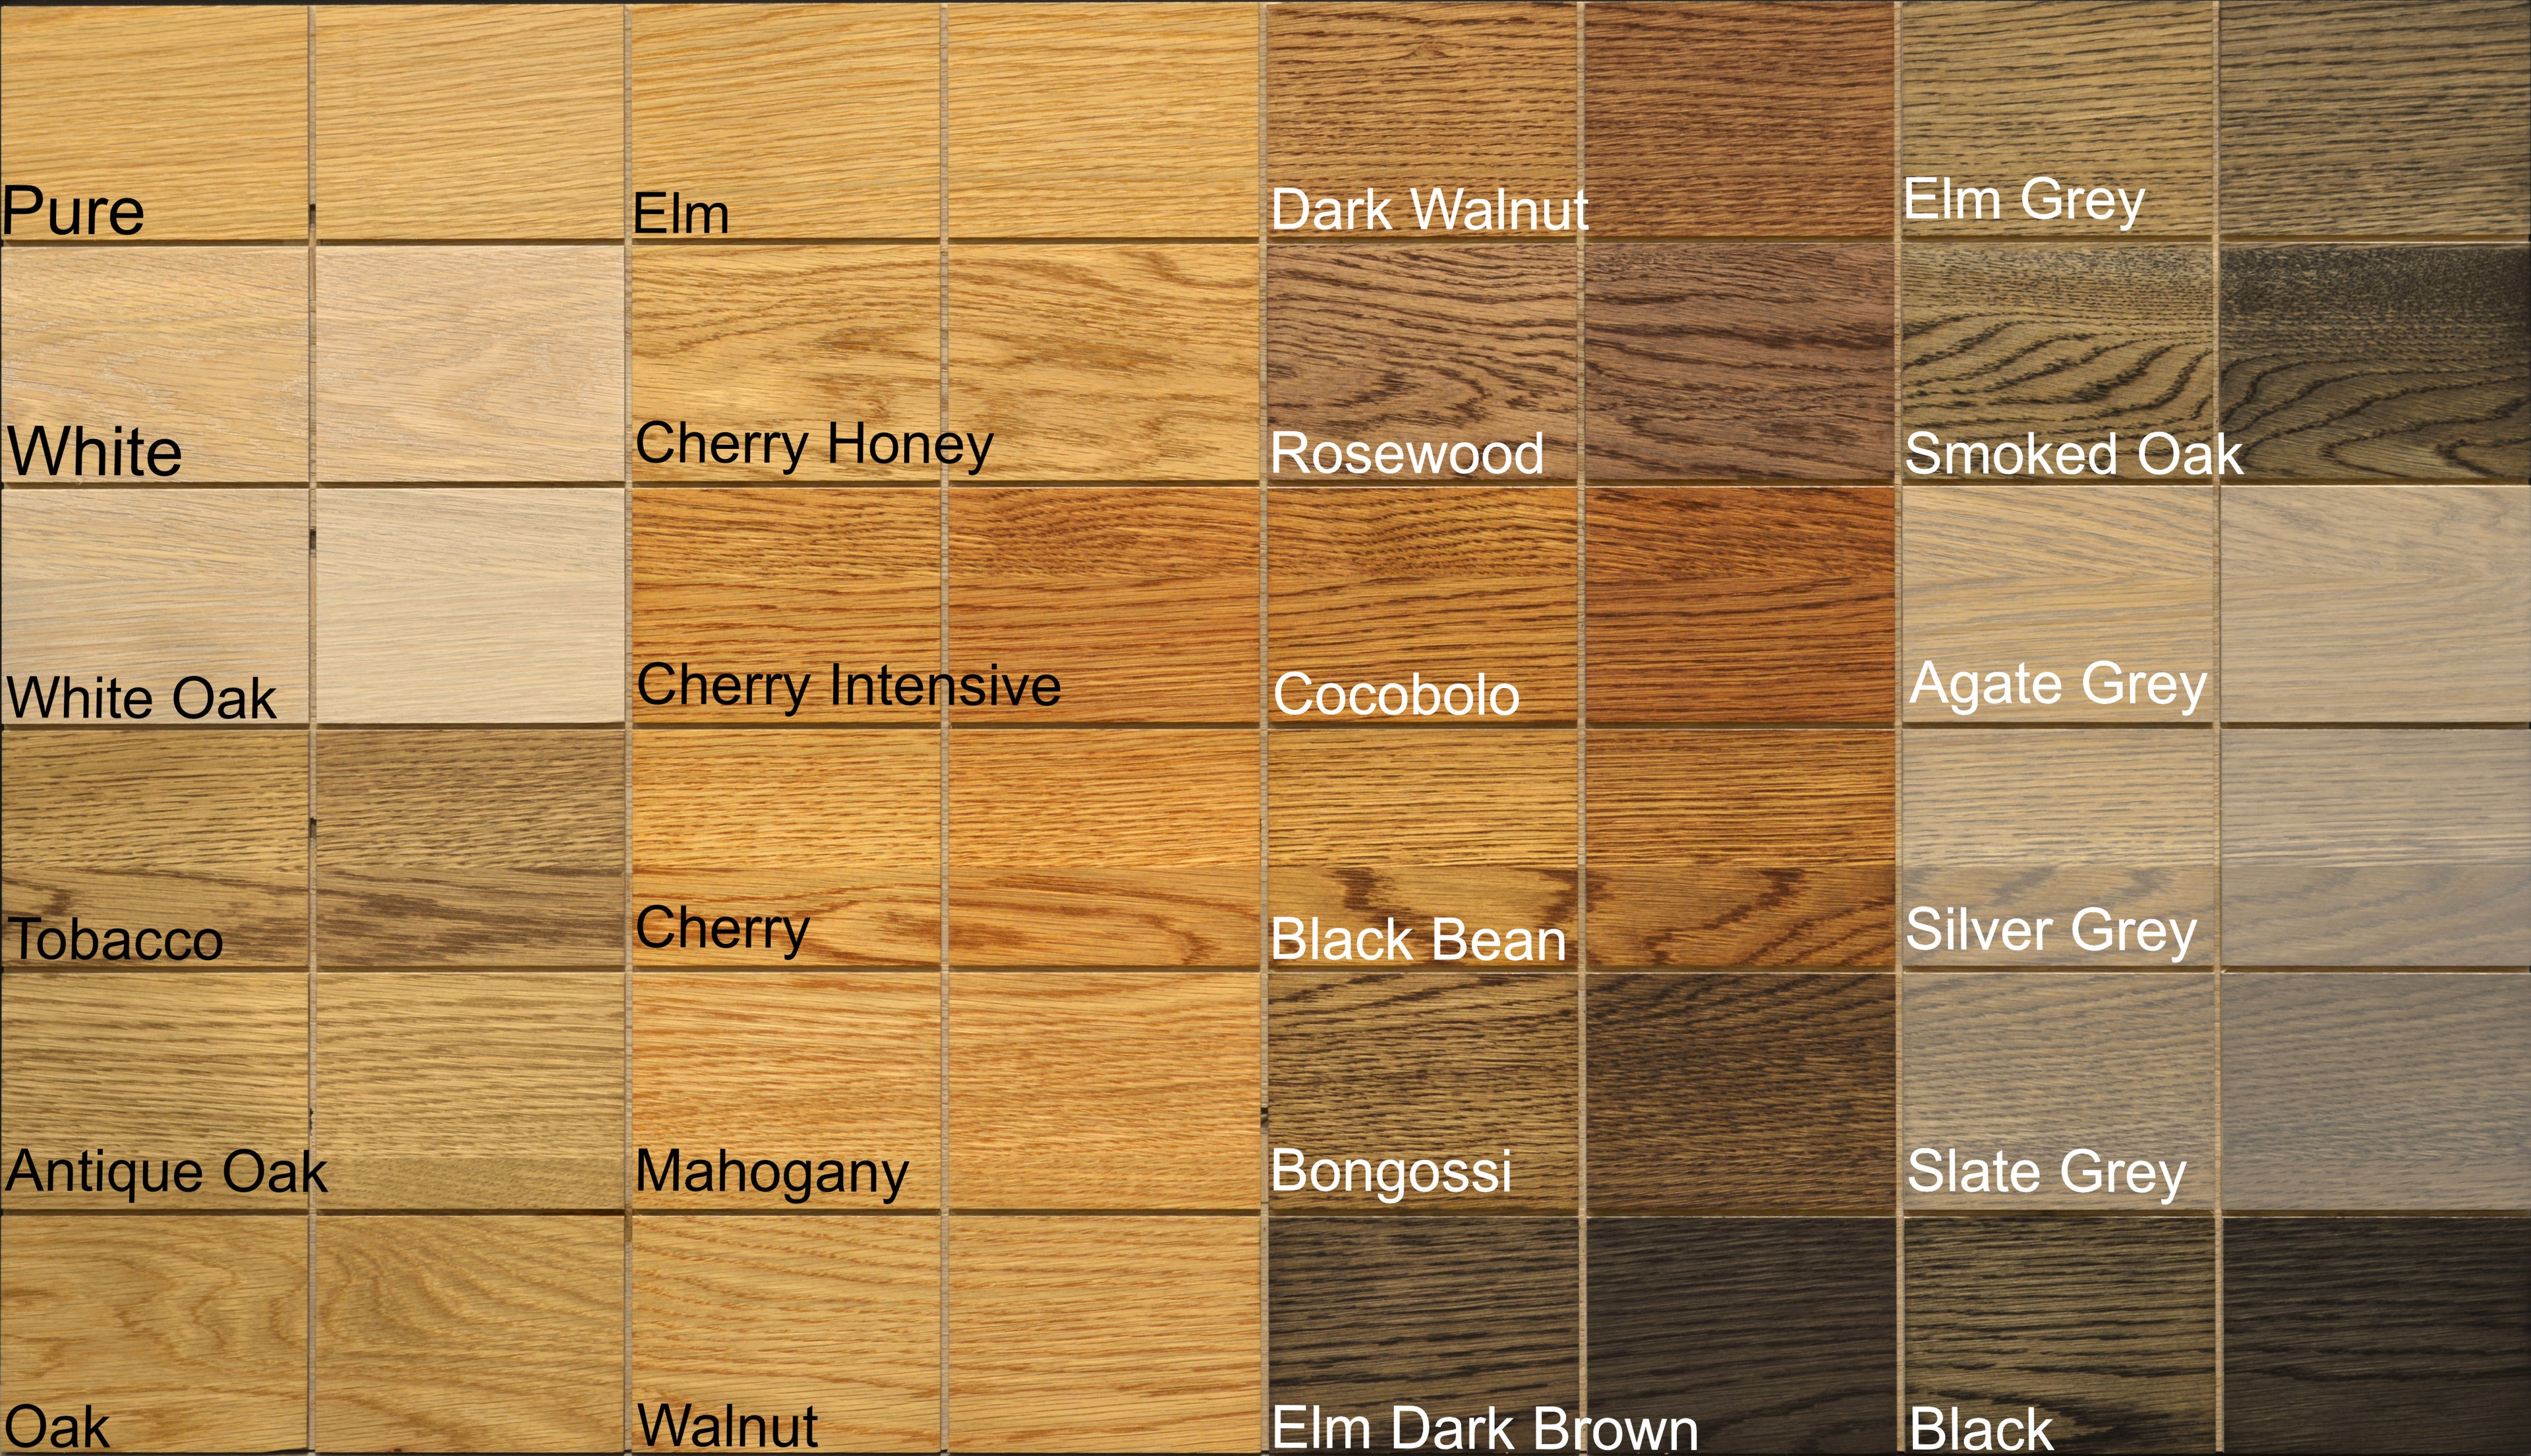 ALL ABOUT ORGANIC LINSEED OIL FOR YOUR INTERIOR WOOD FINISH – Livos